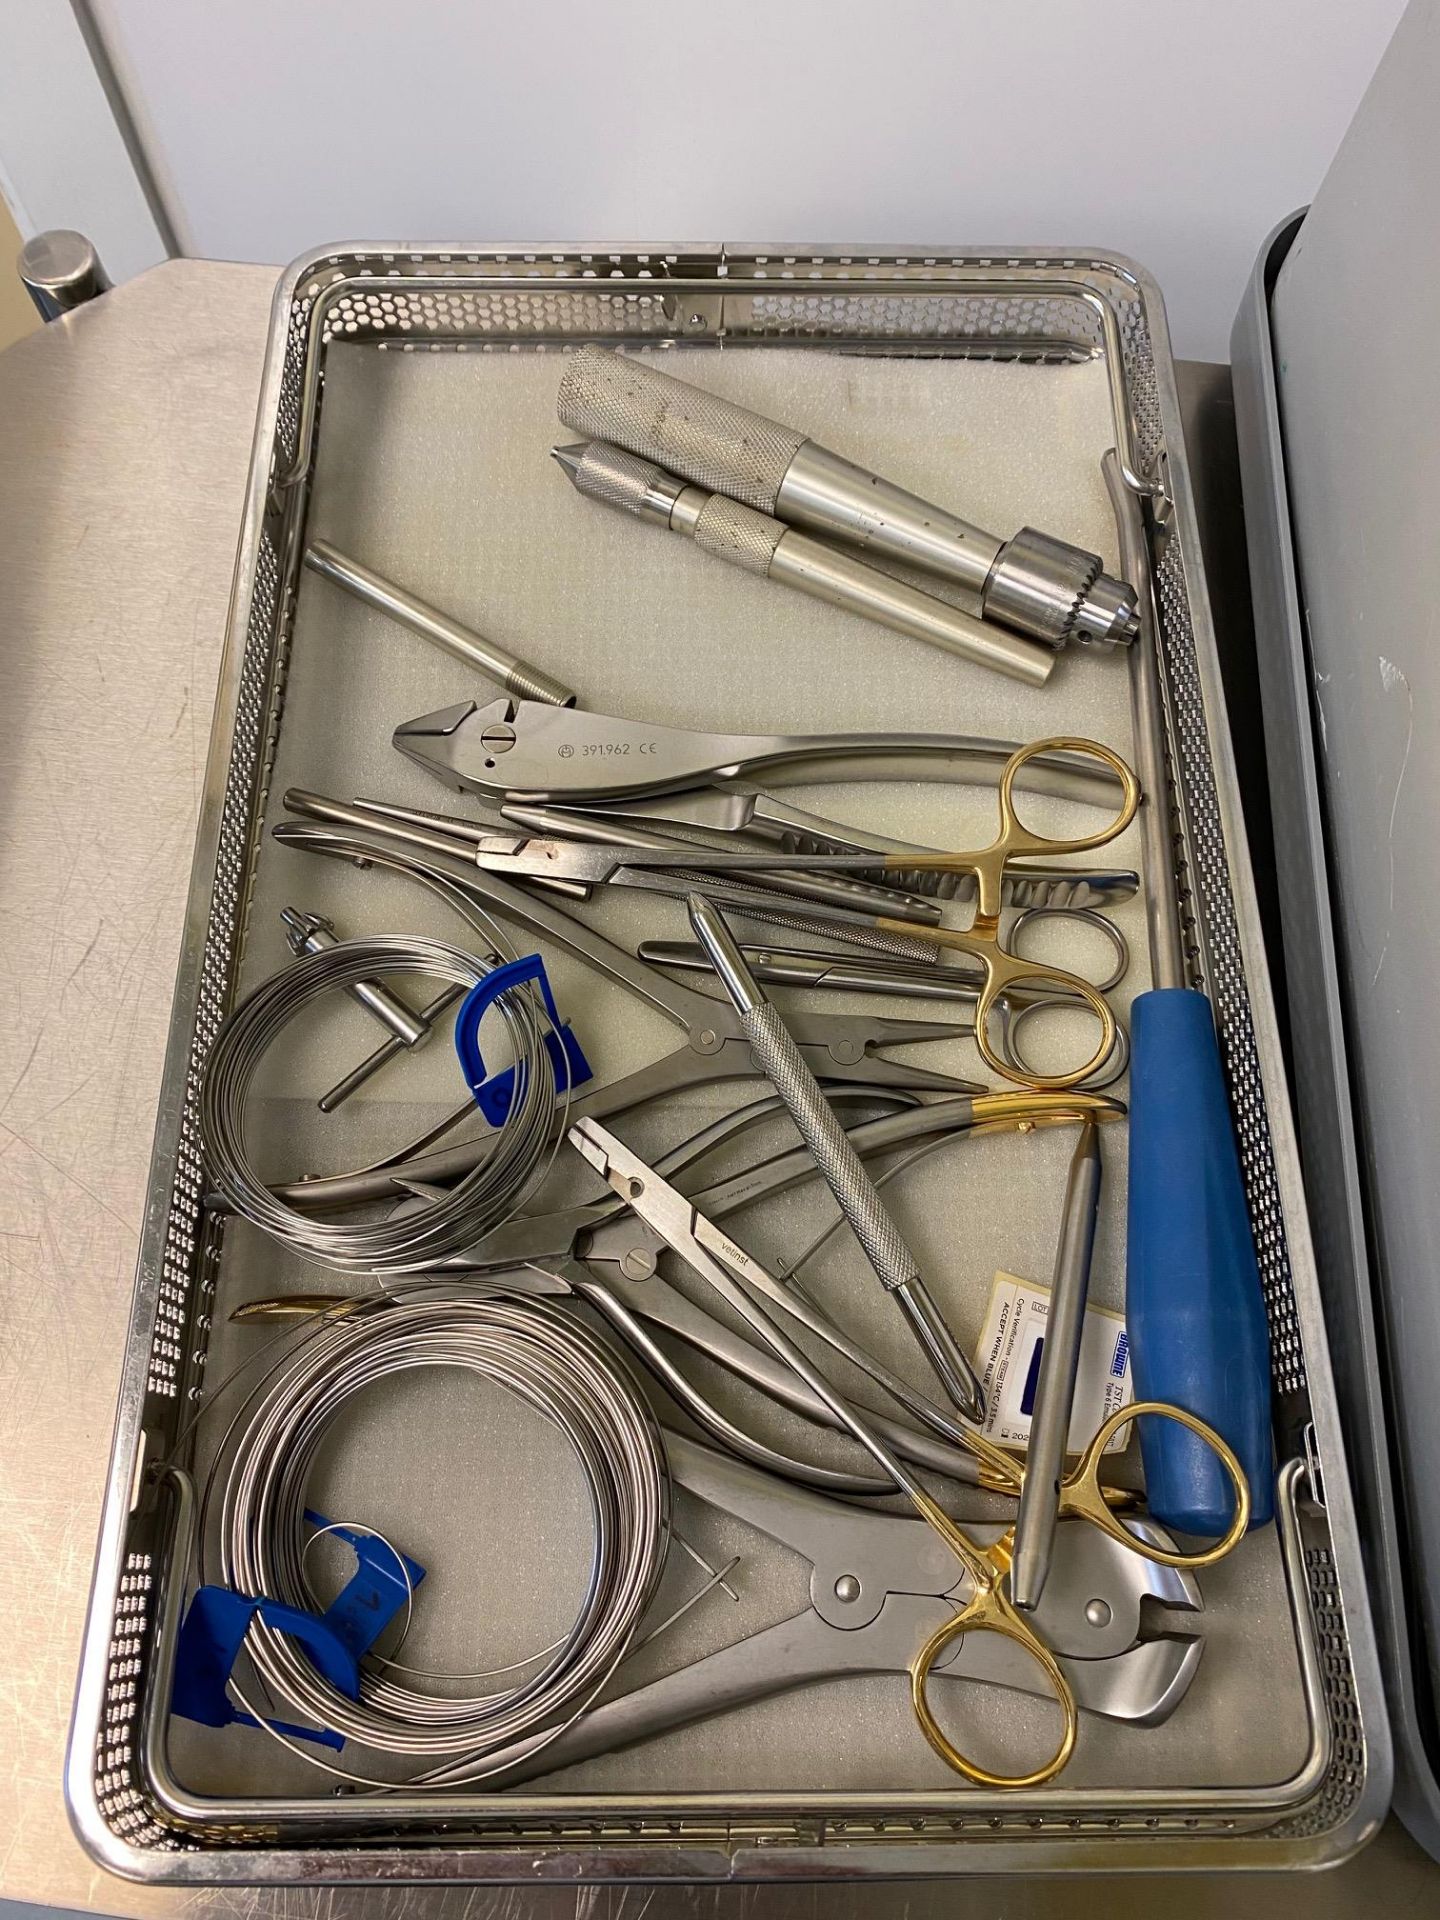 Aesculap surgical storage container with sulcoplasty instruments - Please note container security - Image 2 of 4